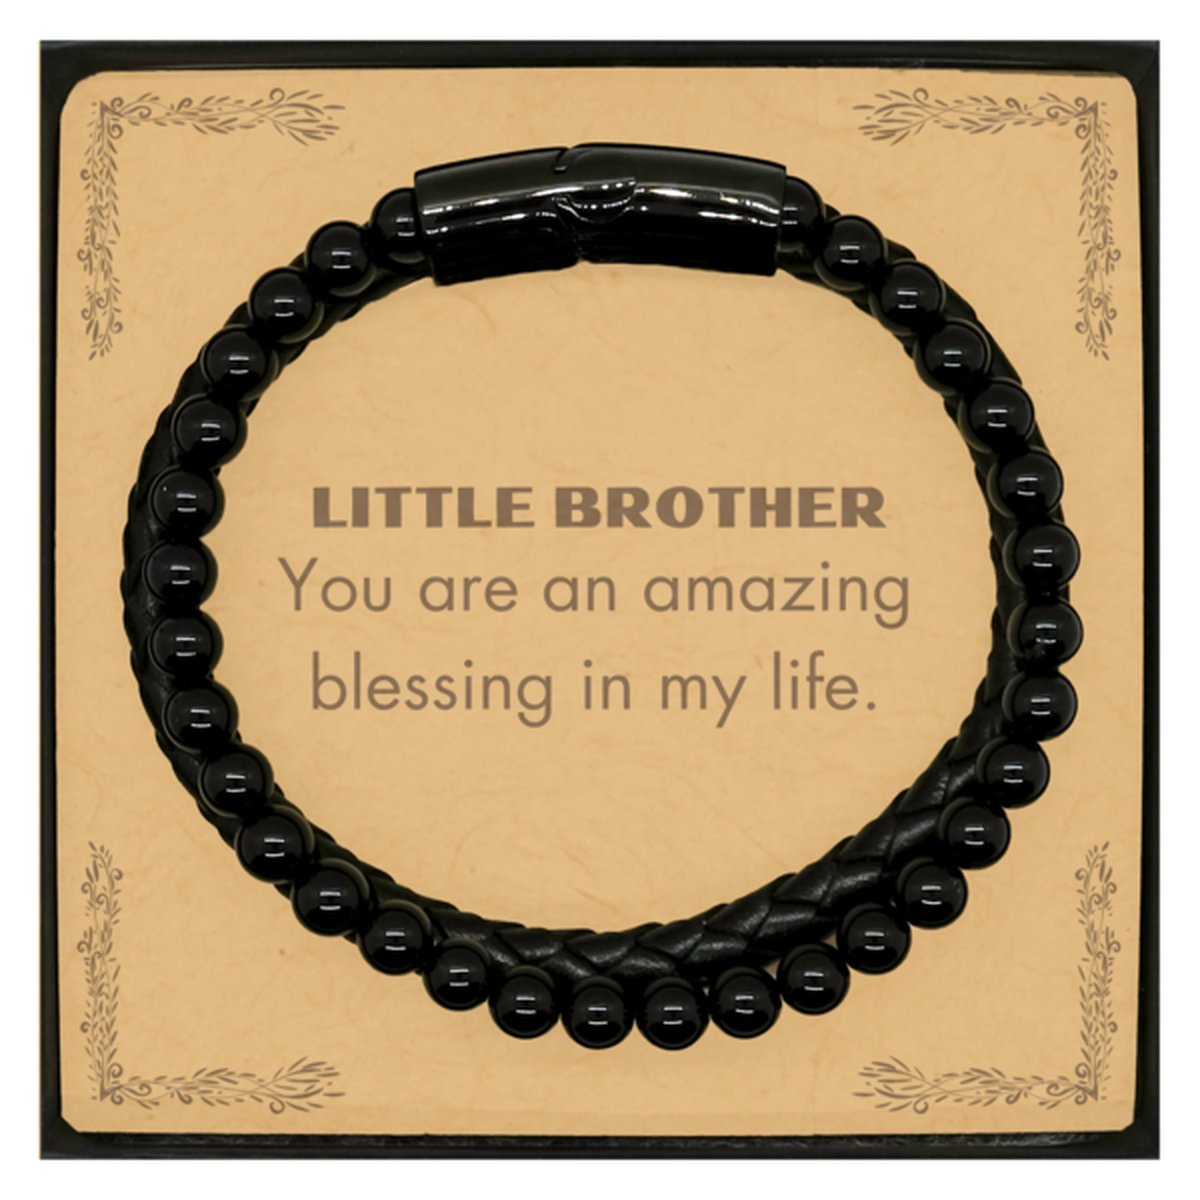 Little Brother Stone Leather Bracelets, You are an amazing blessing in my life, Thank You Gifts For Little Brother, Inspirational Birthday Christmas Unique Gifts For Little Brother